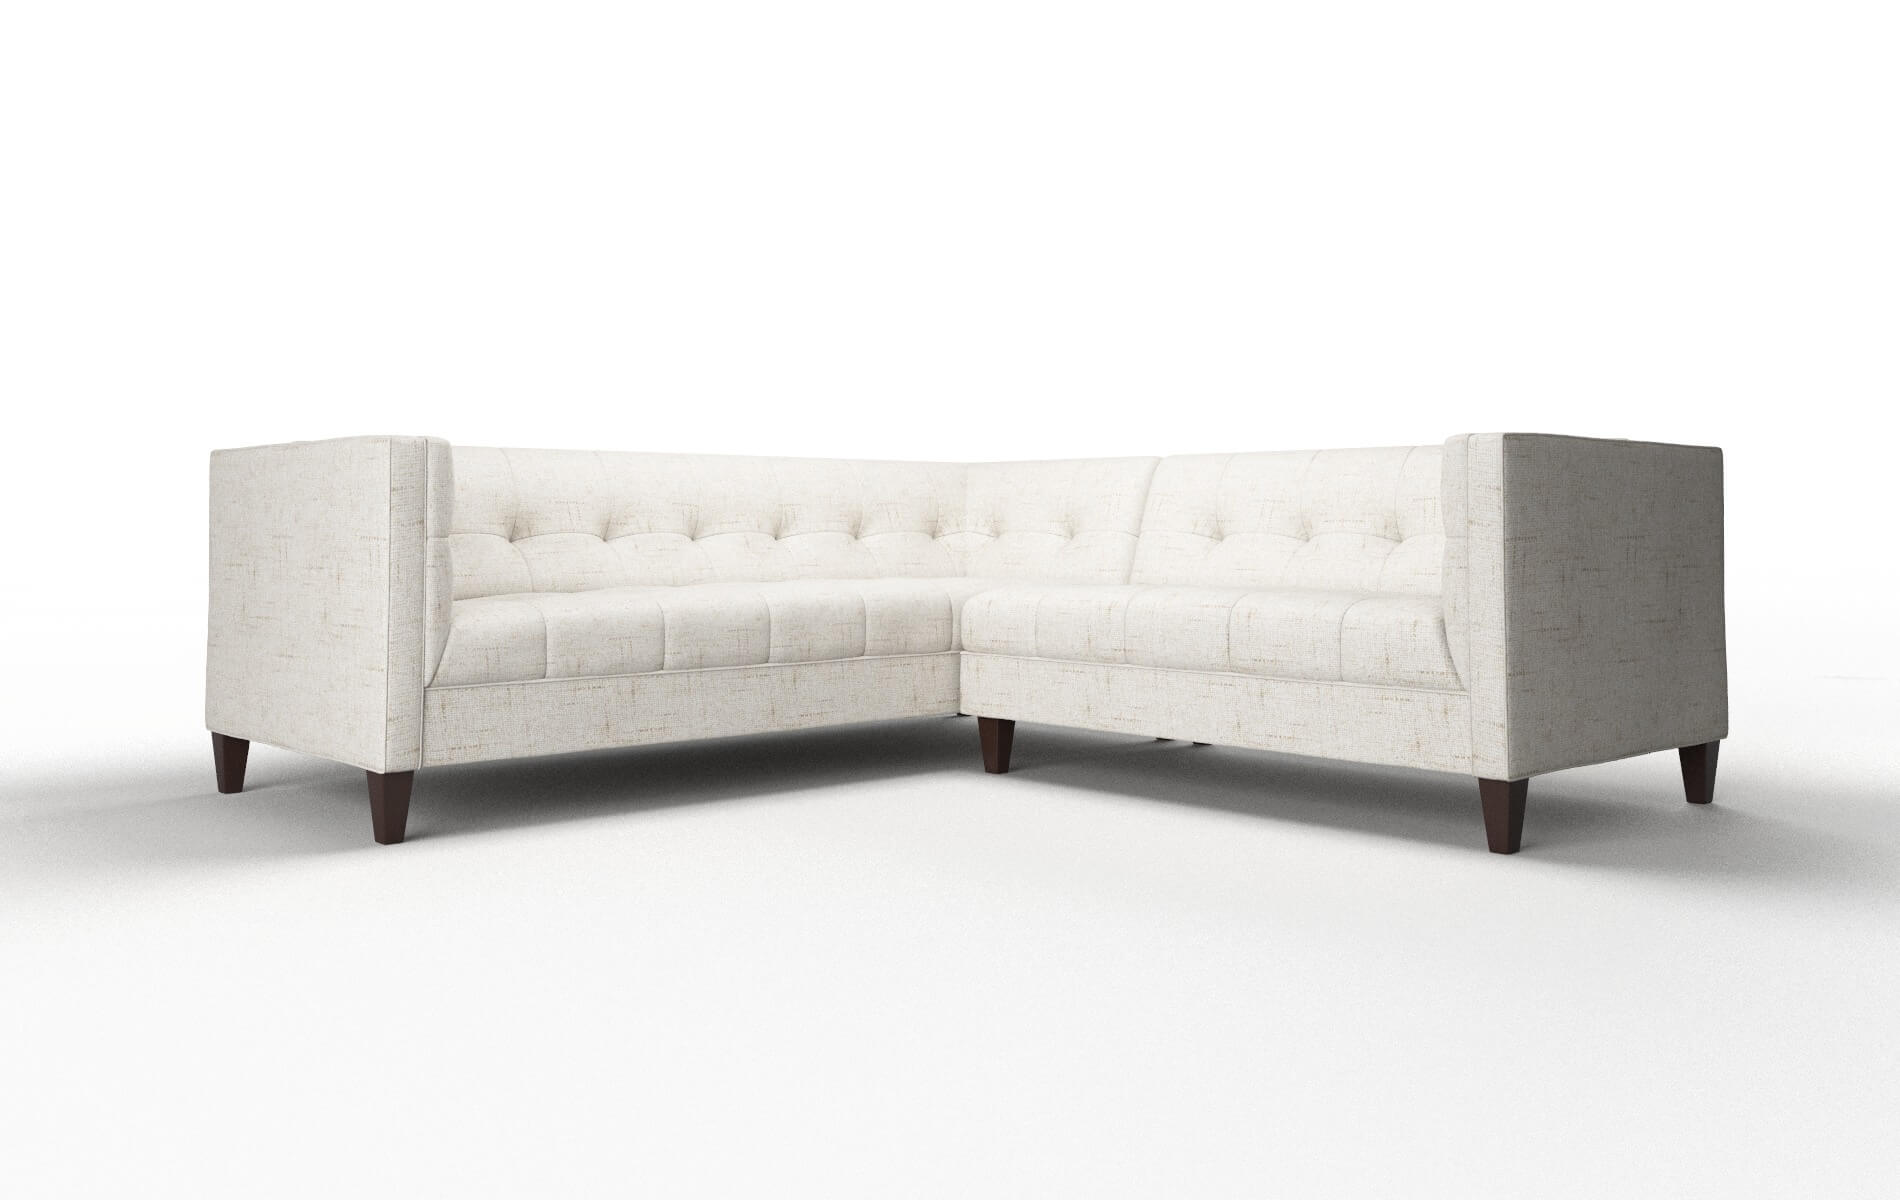 Messina Oceanside Natural Sectional espresso legs